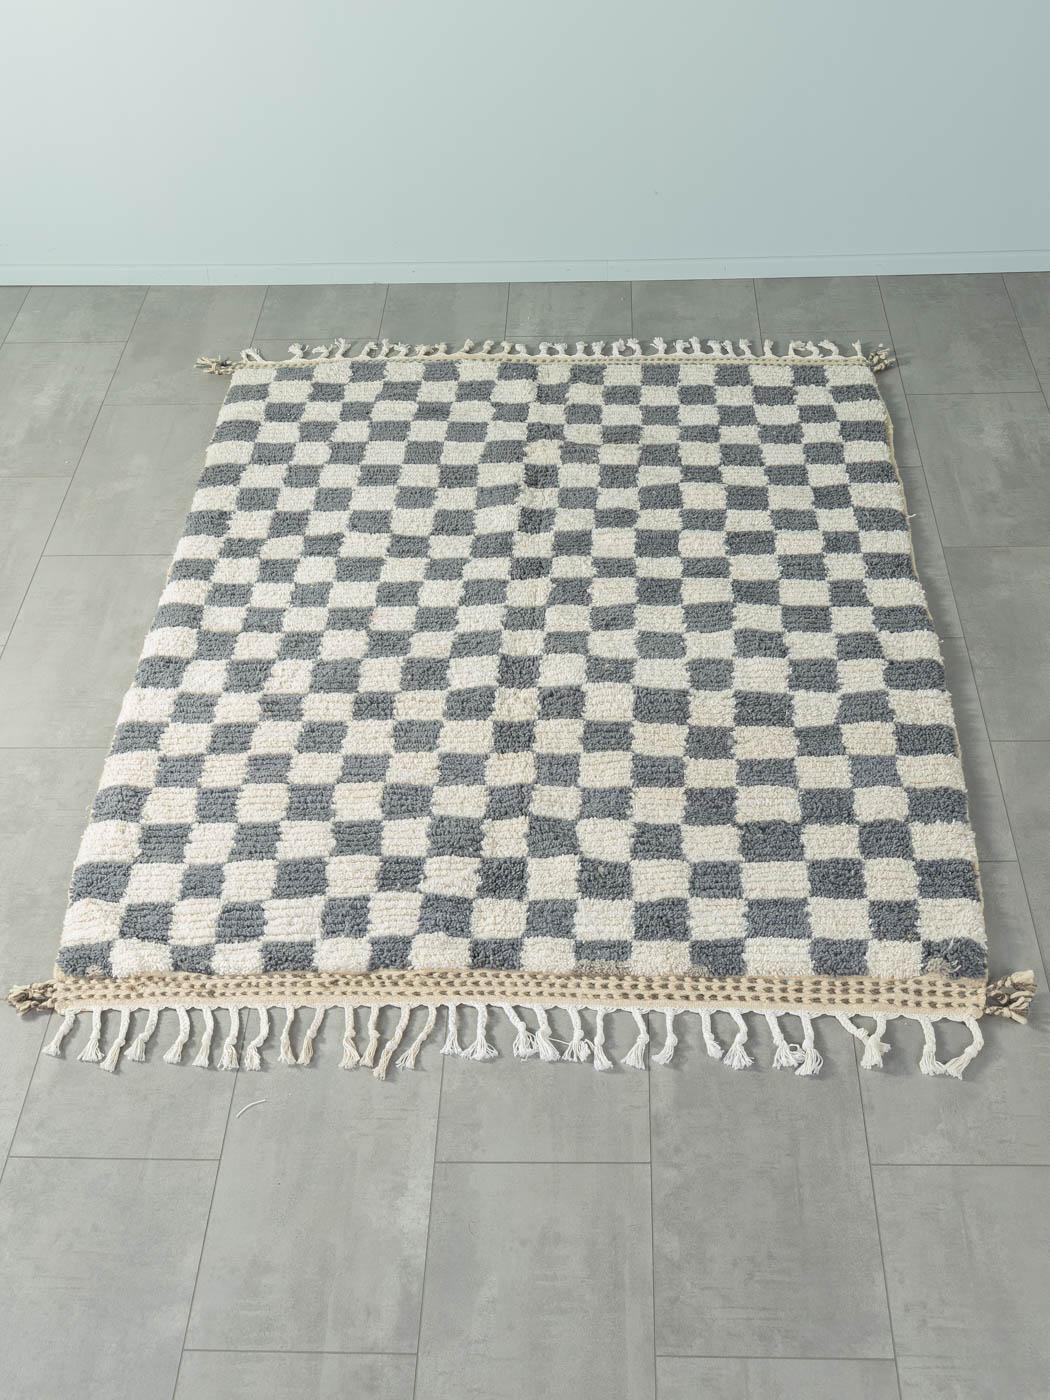 Grey Blue Check is a contemporary 100% wool rug – thick and soft, comfortable underfoot. Our Berber rugs are handwoven and handknotted by Amazigh women in the Atlas Mountains. These communities have been crafting rugs for thousands of years. One